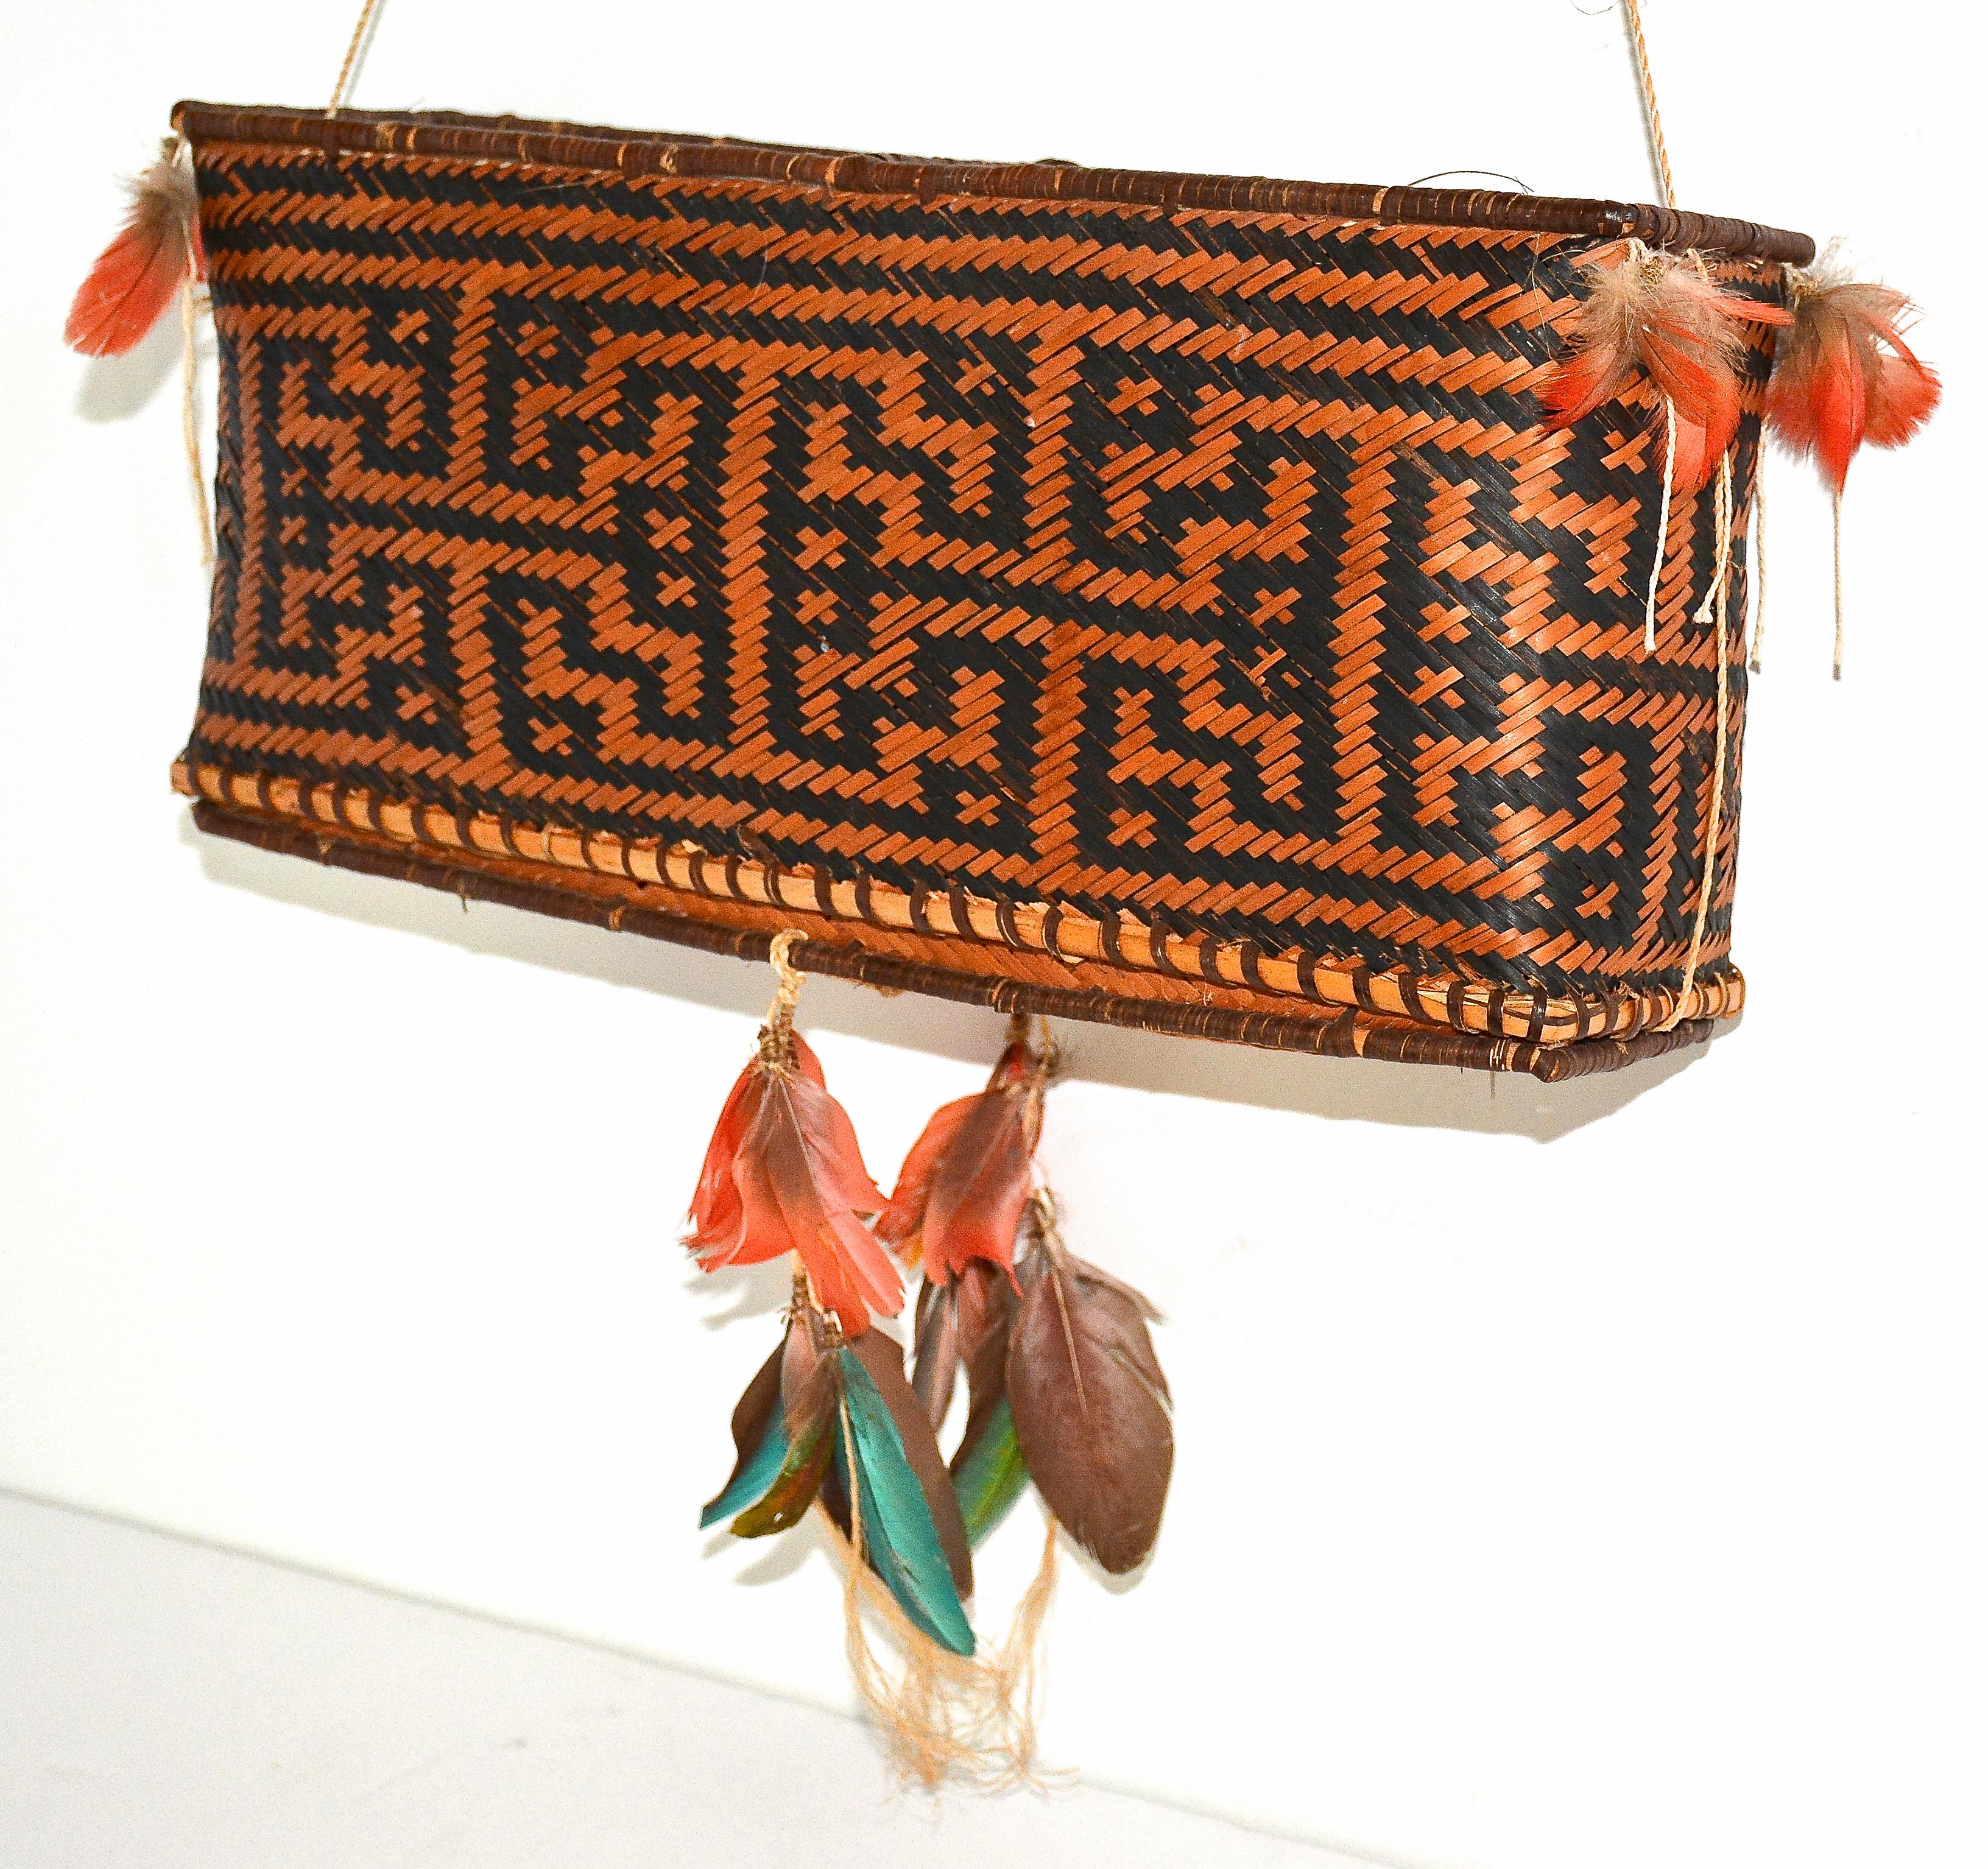 Feather storage basket
Rikbaktsa Tribe, Jurene River, Mato Grosso, Brazil
1990
Plaited fiber, wood, feathers, twined natural fiber, and cotton.
5 inche H. x 12 inches L. x 3 inches W.